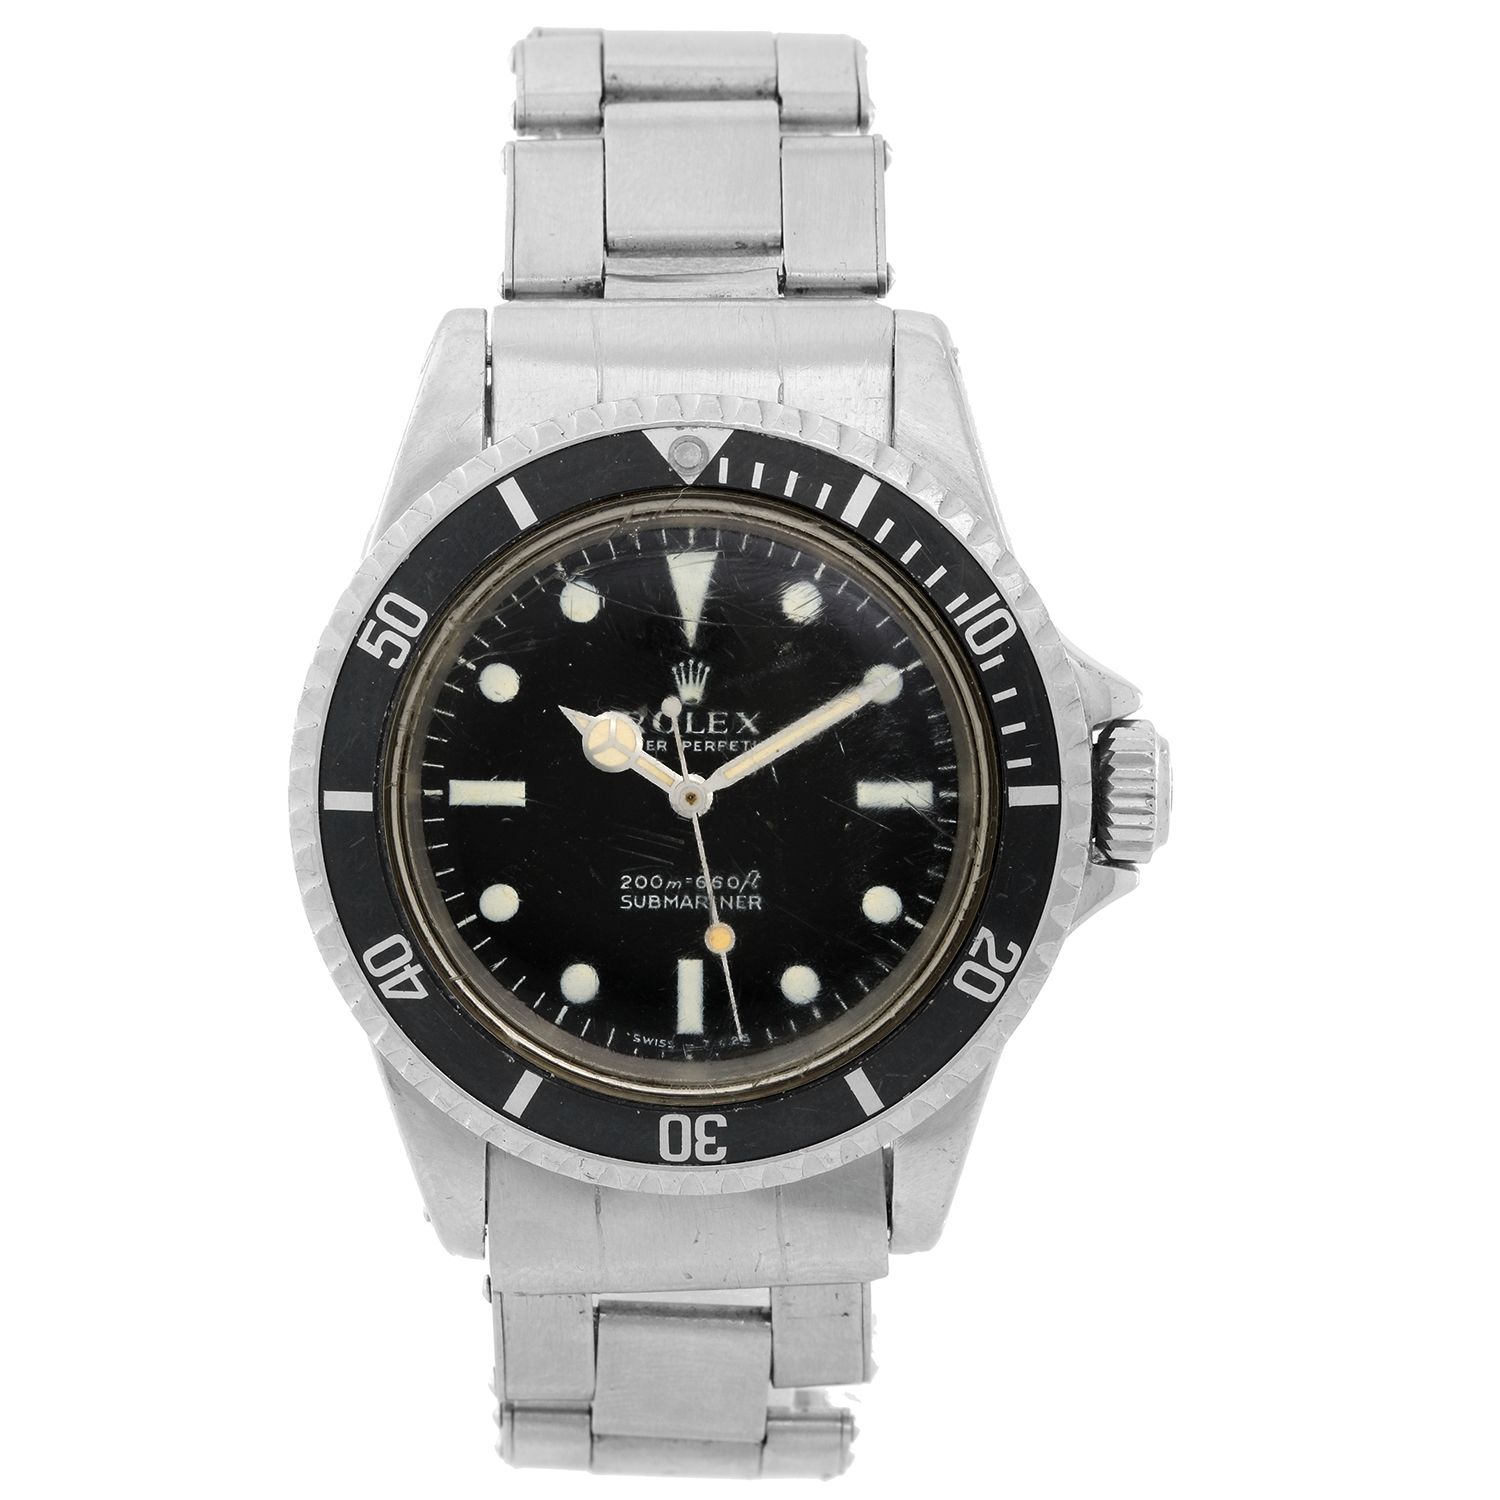 Oyster Perpetual Submariner 40mm steel watch, Rolex